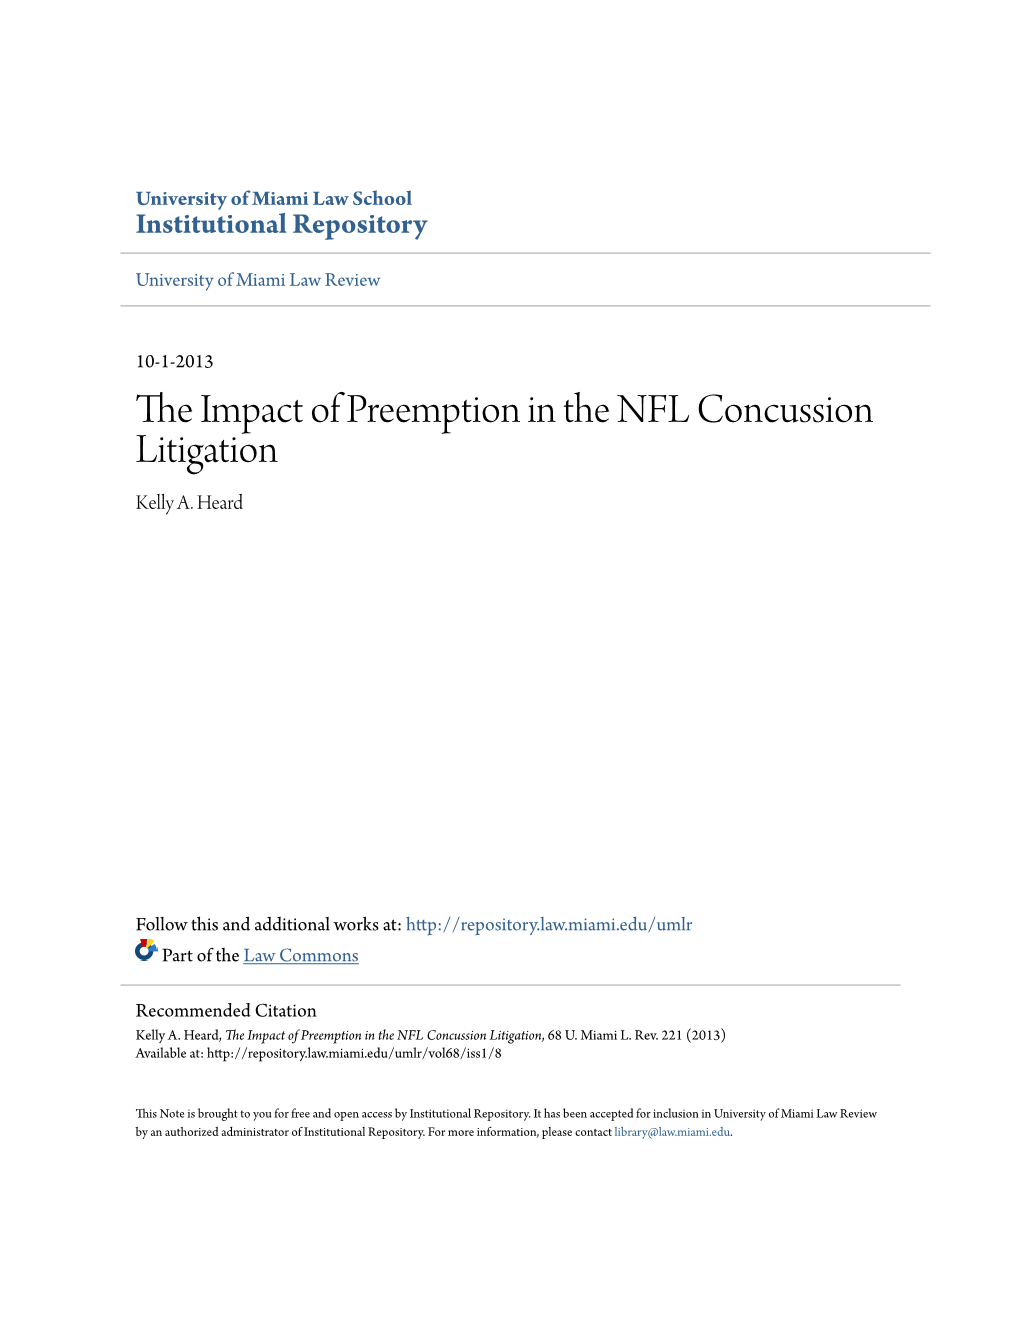 The Impact of Preemption in the NFL Concussion Litigation, 68 U